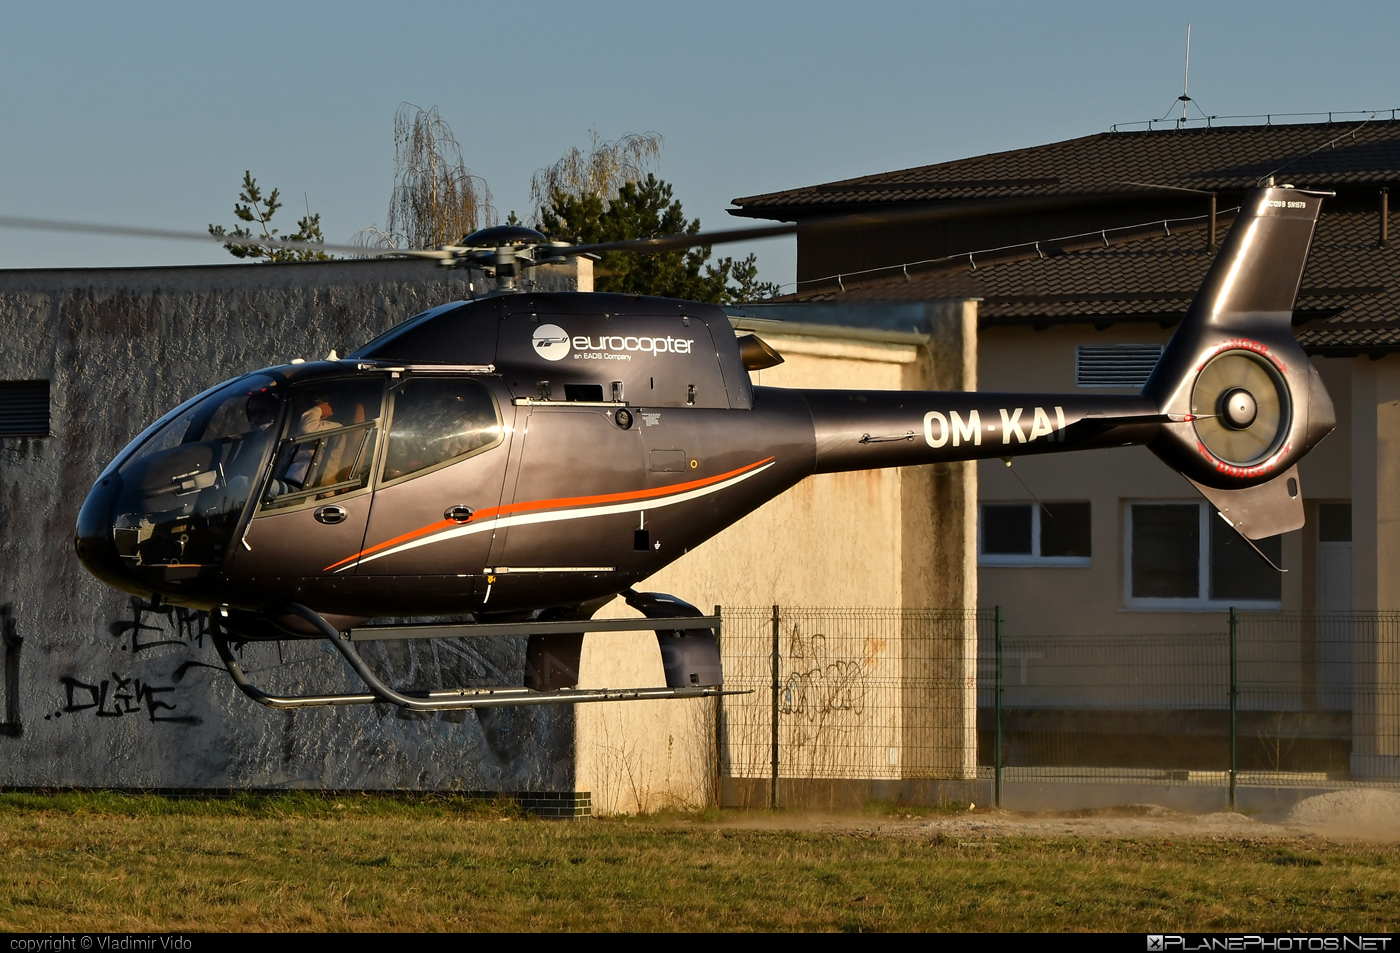 Eurocopter EC120 B Colibri - OM-KAI operated by Private operator #ec120 #ec120b #ec120bcolibri #ec120colibri #eurocopter #eurocoptercolibri #eurocopterec120colibri